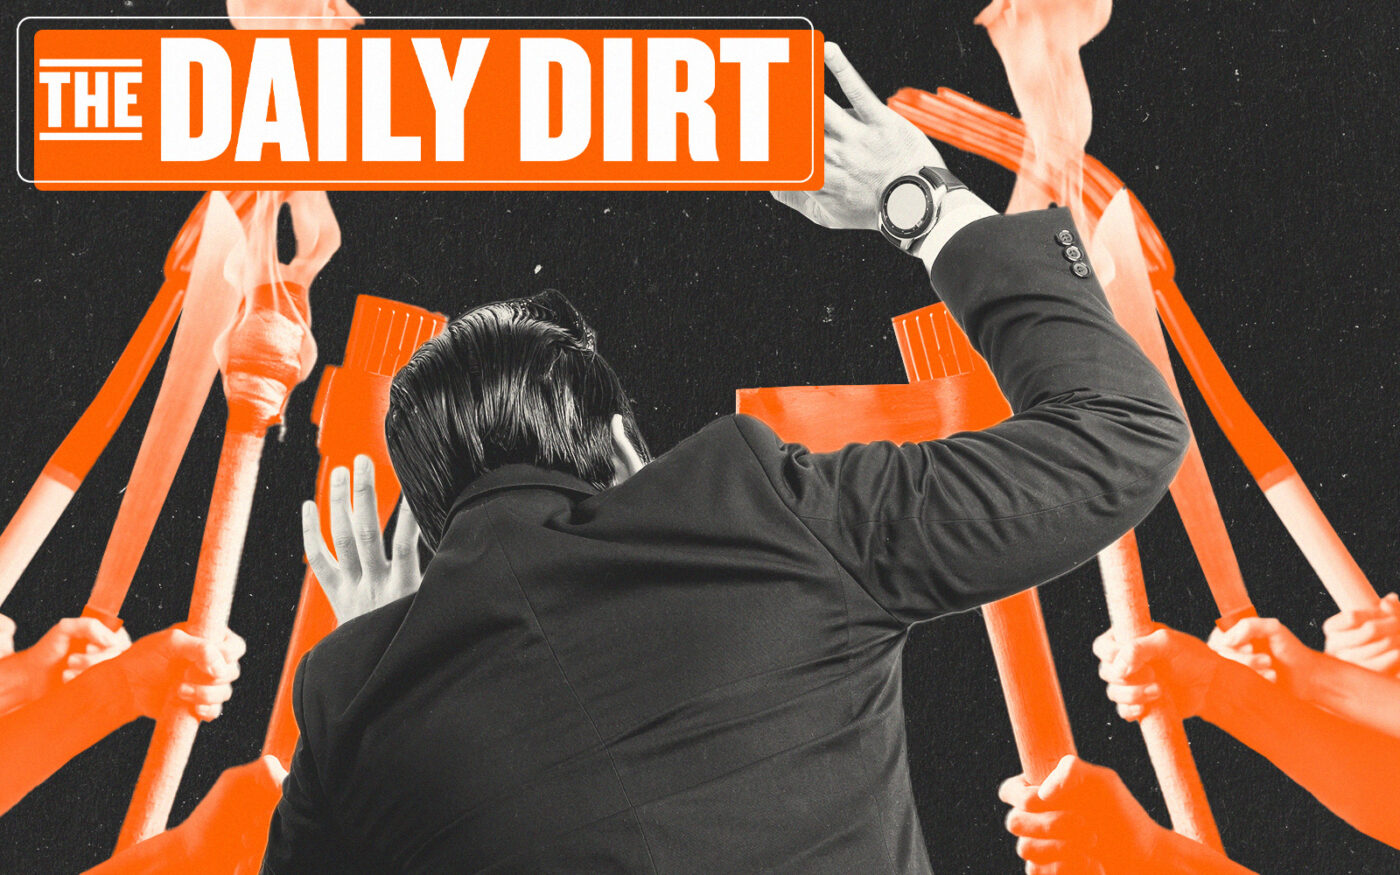 When Caving In to Critics Can Does Them Harm: The Daily Dirt